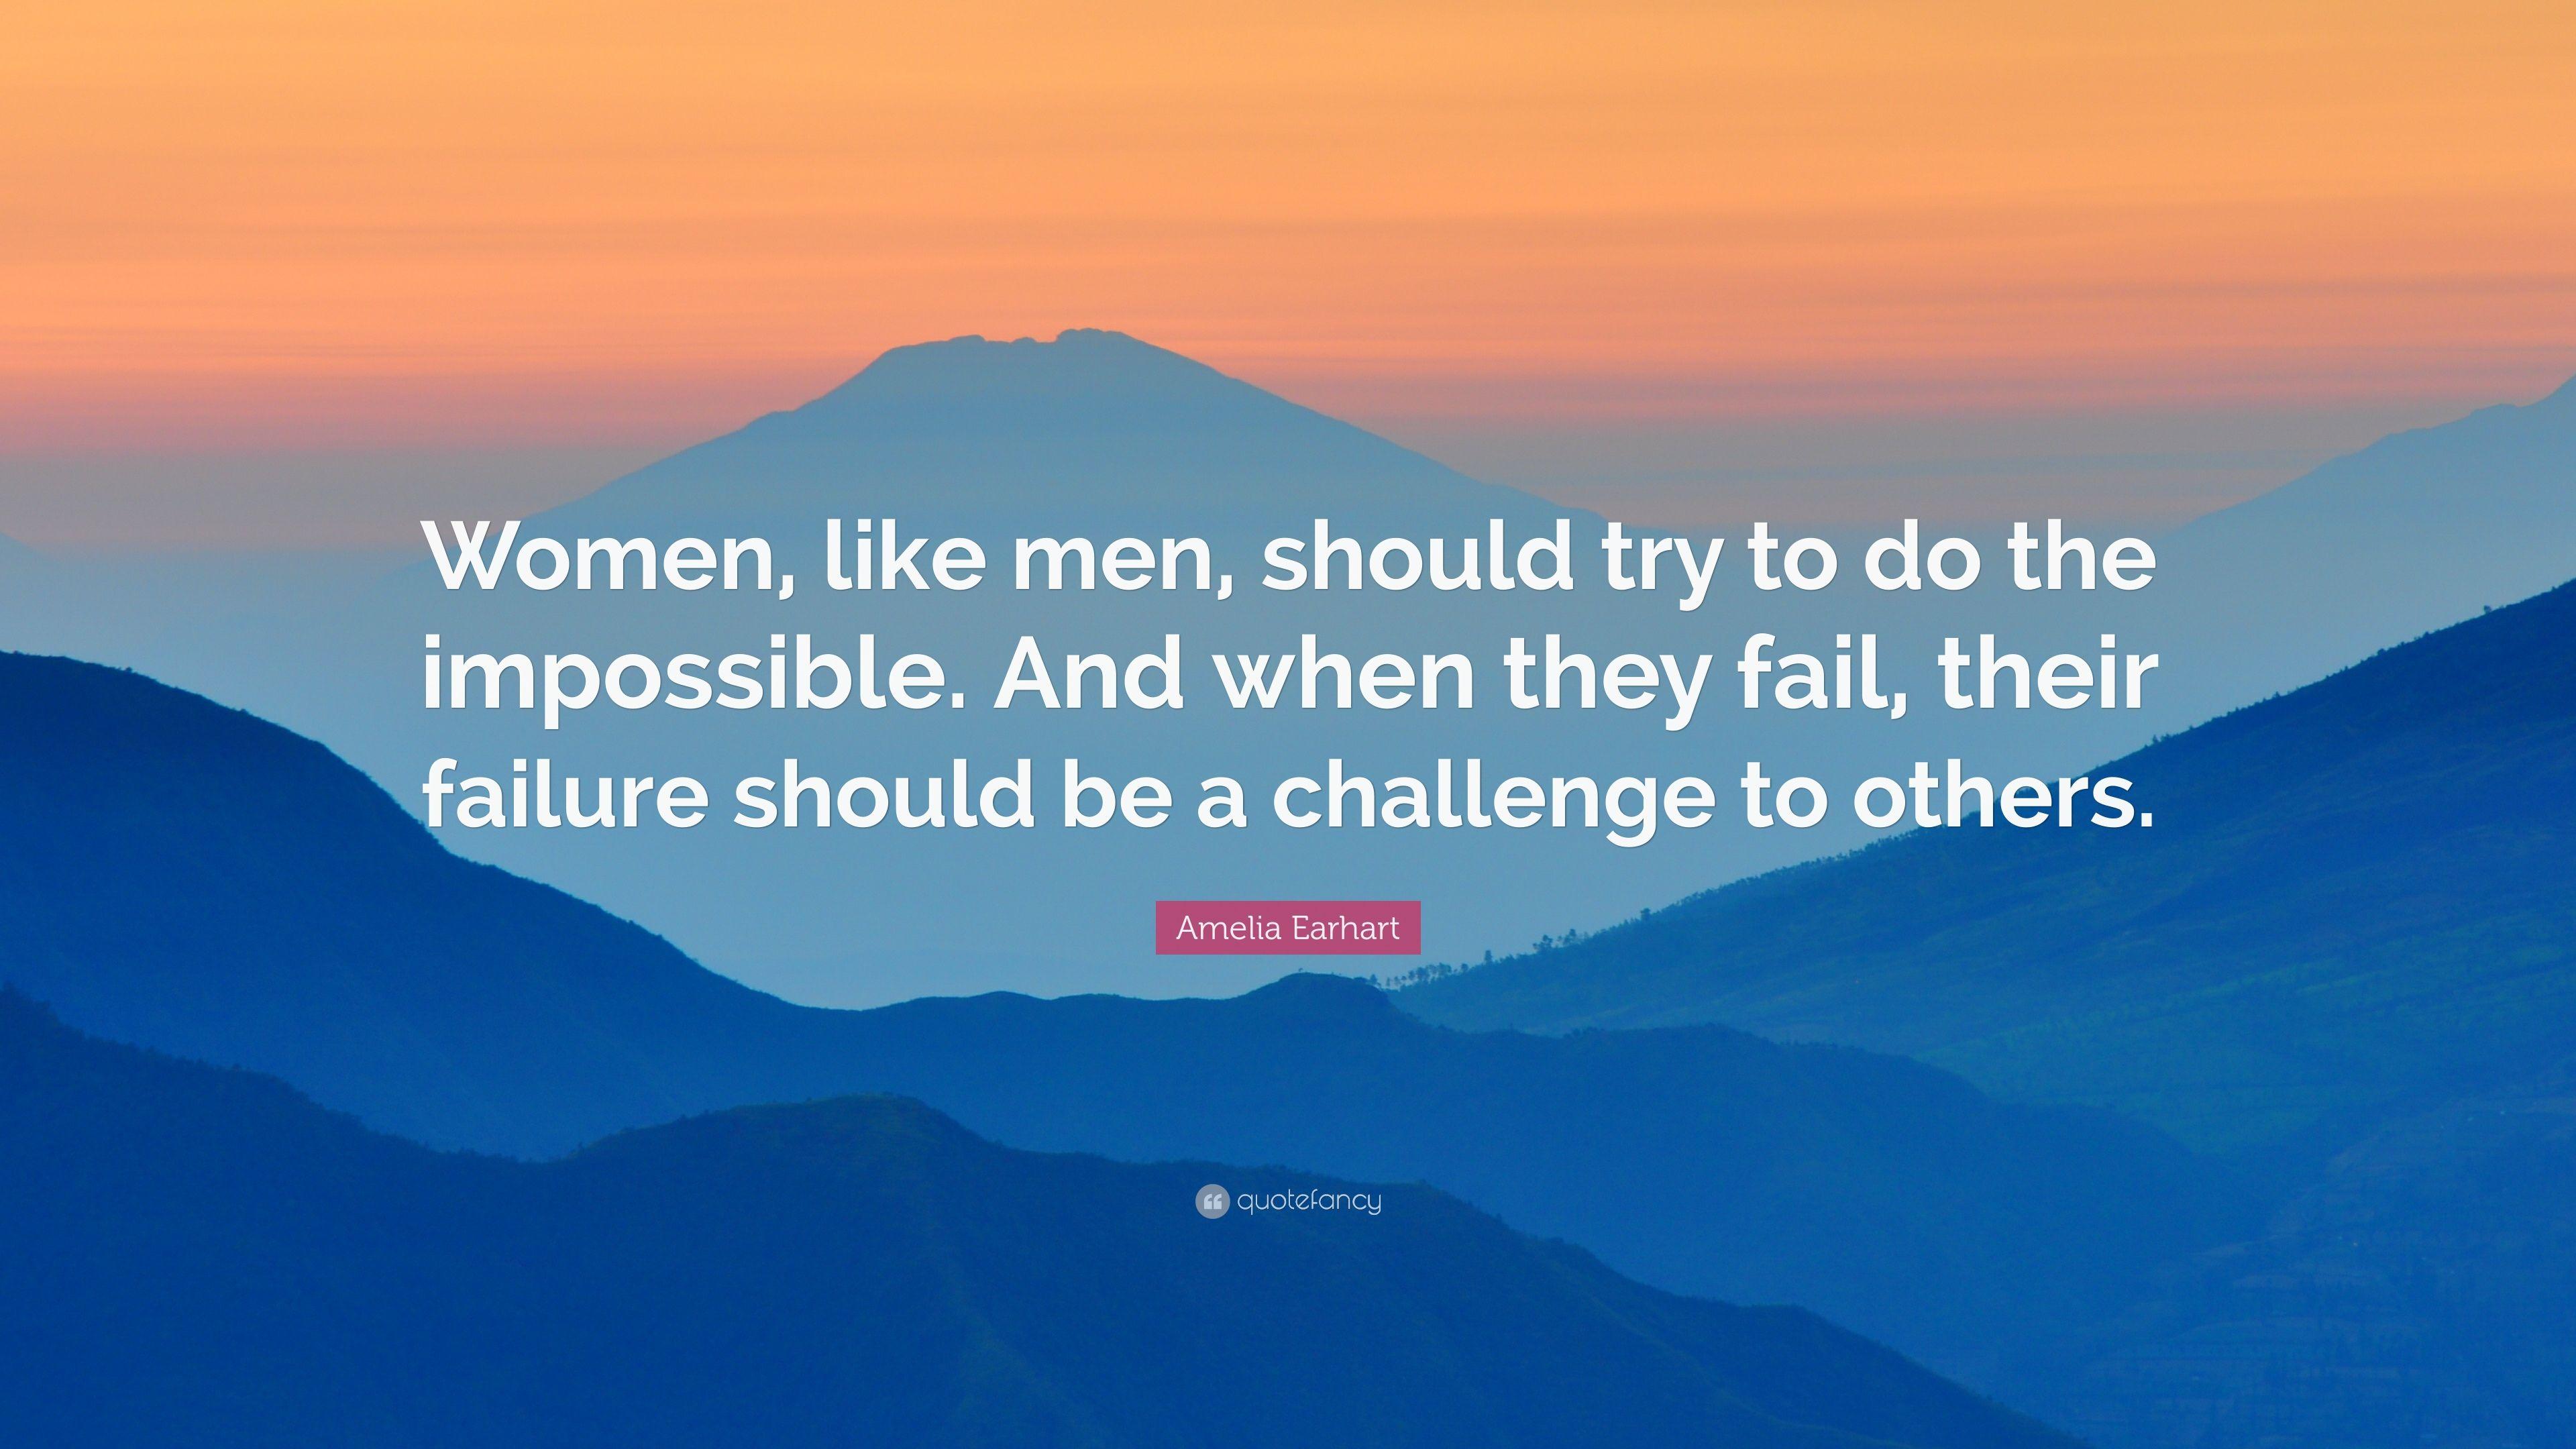 Amelia Earhart Quote: “Women, like men, should try to do